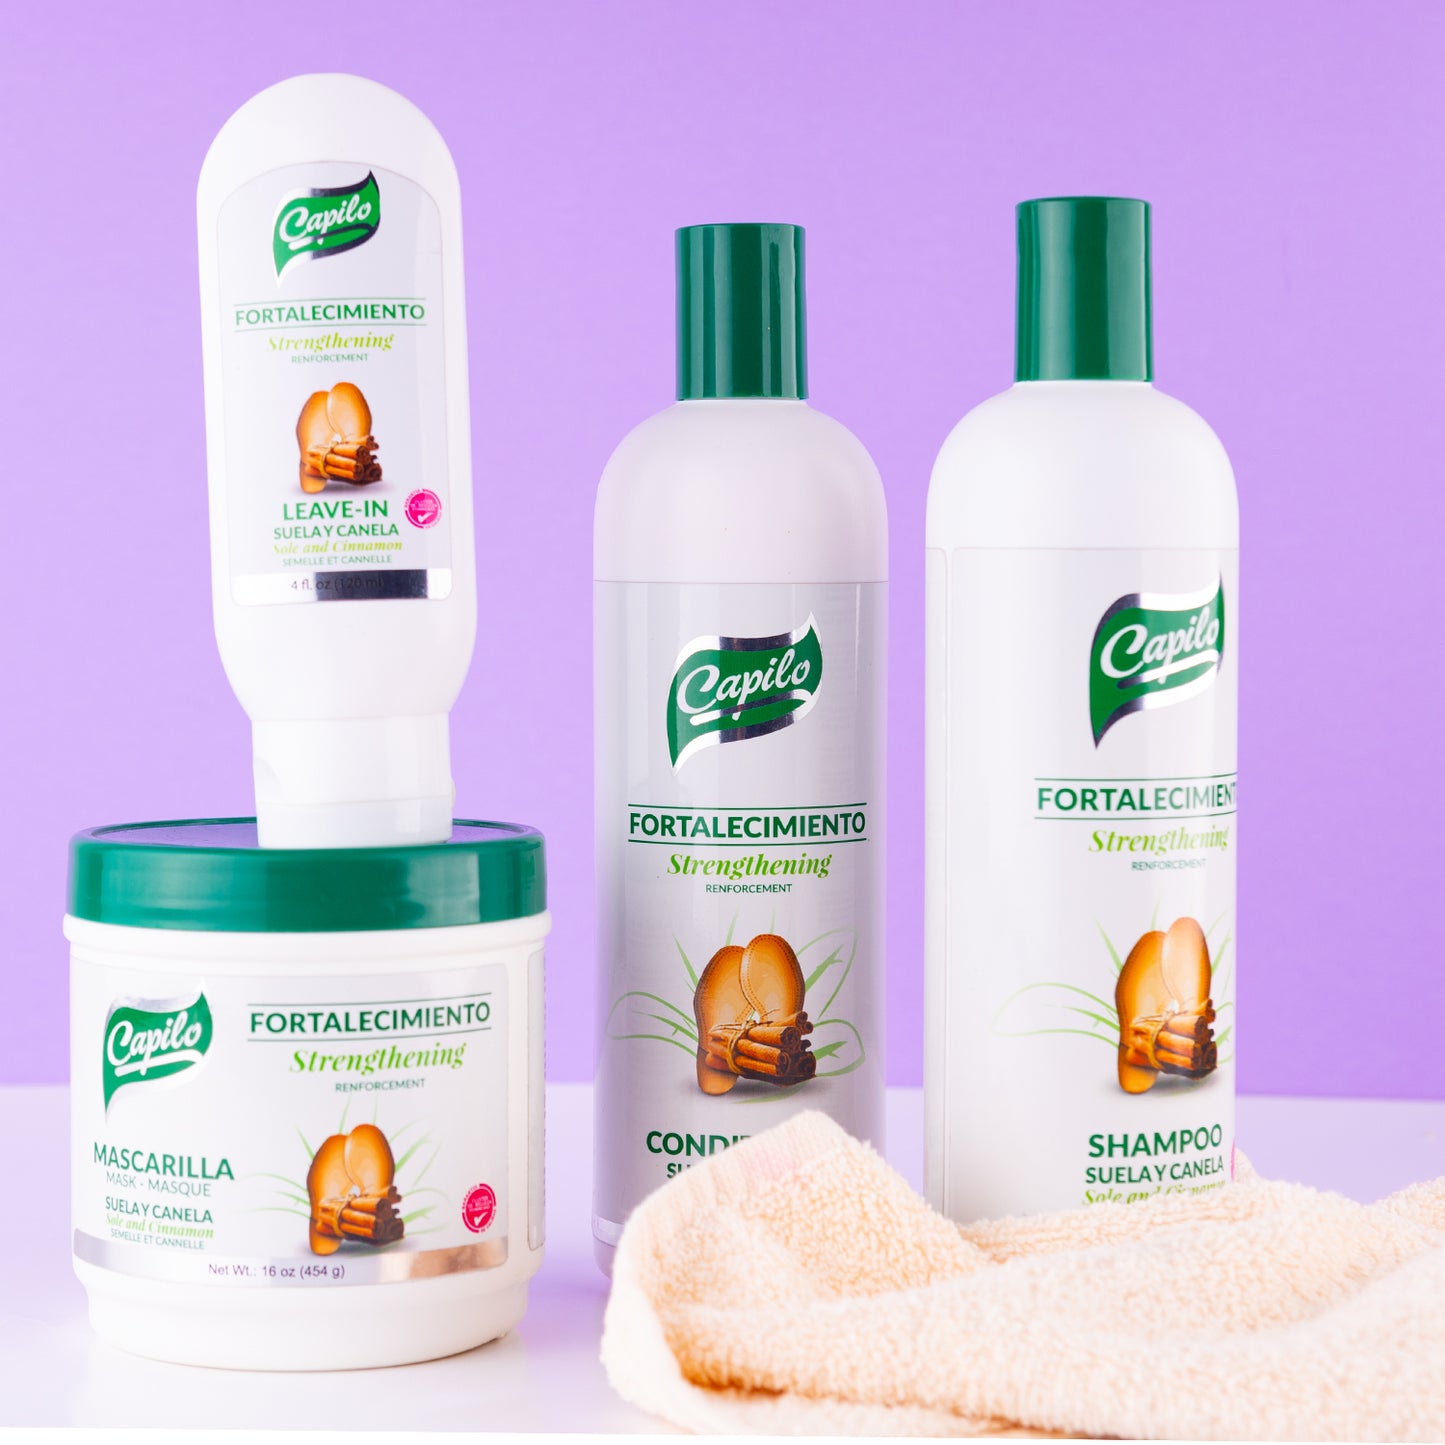 CAPILO SOLE AND CINNAMON LINE | STRENGTHENING PRODUCT | HAIR THICKENER. MINERAL OIL FREE, PETROLEUM JELLY FREE